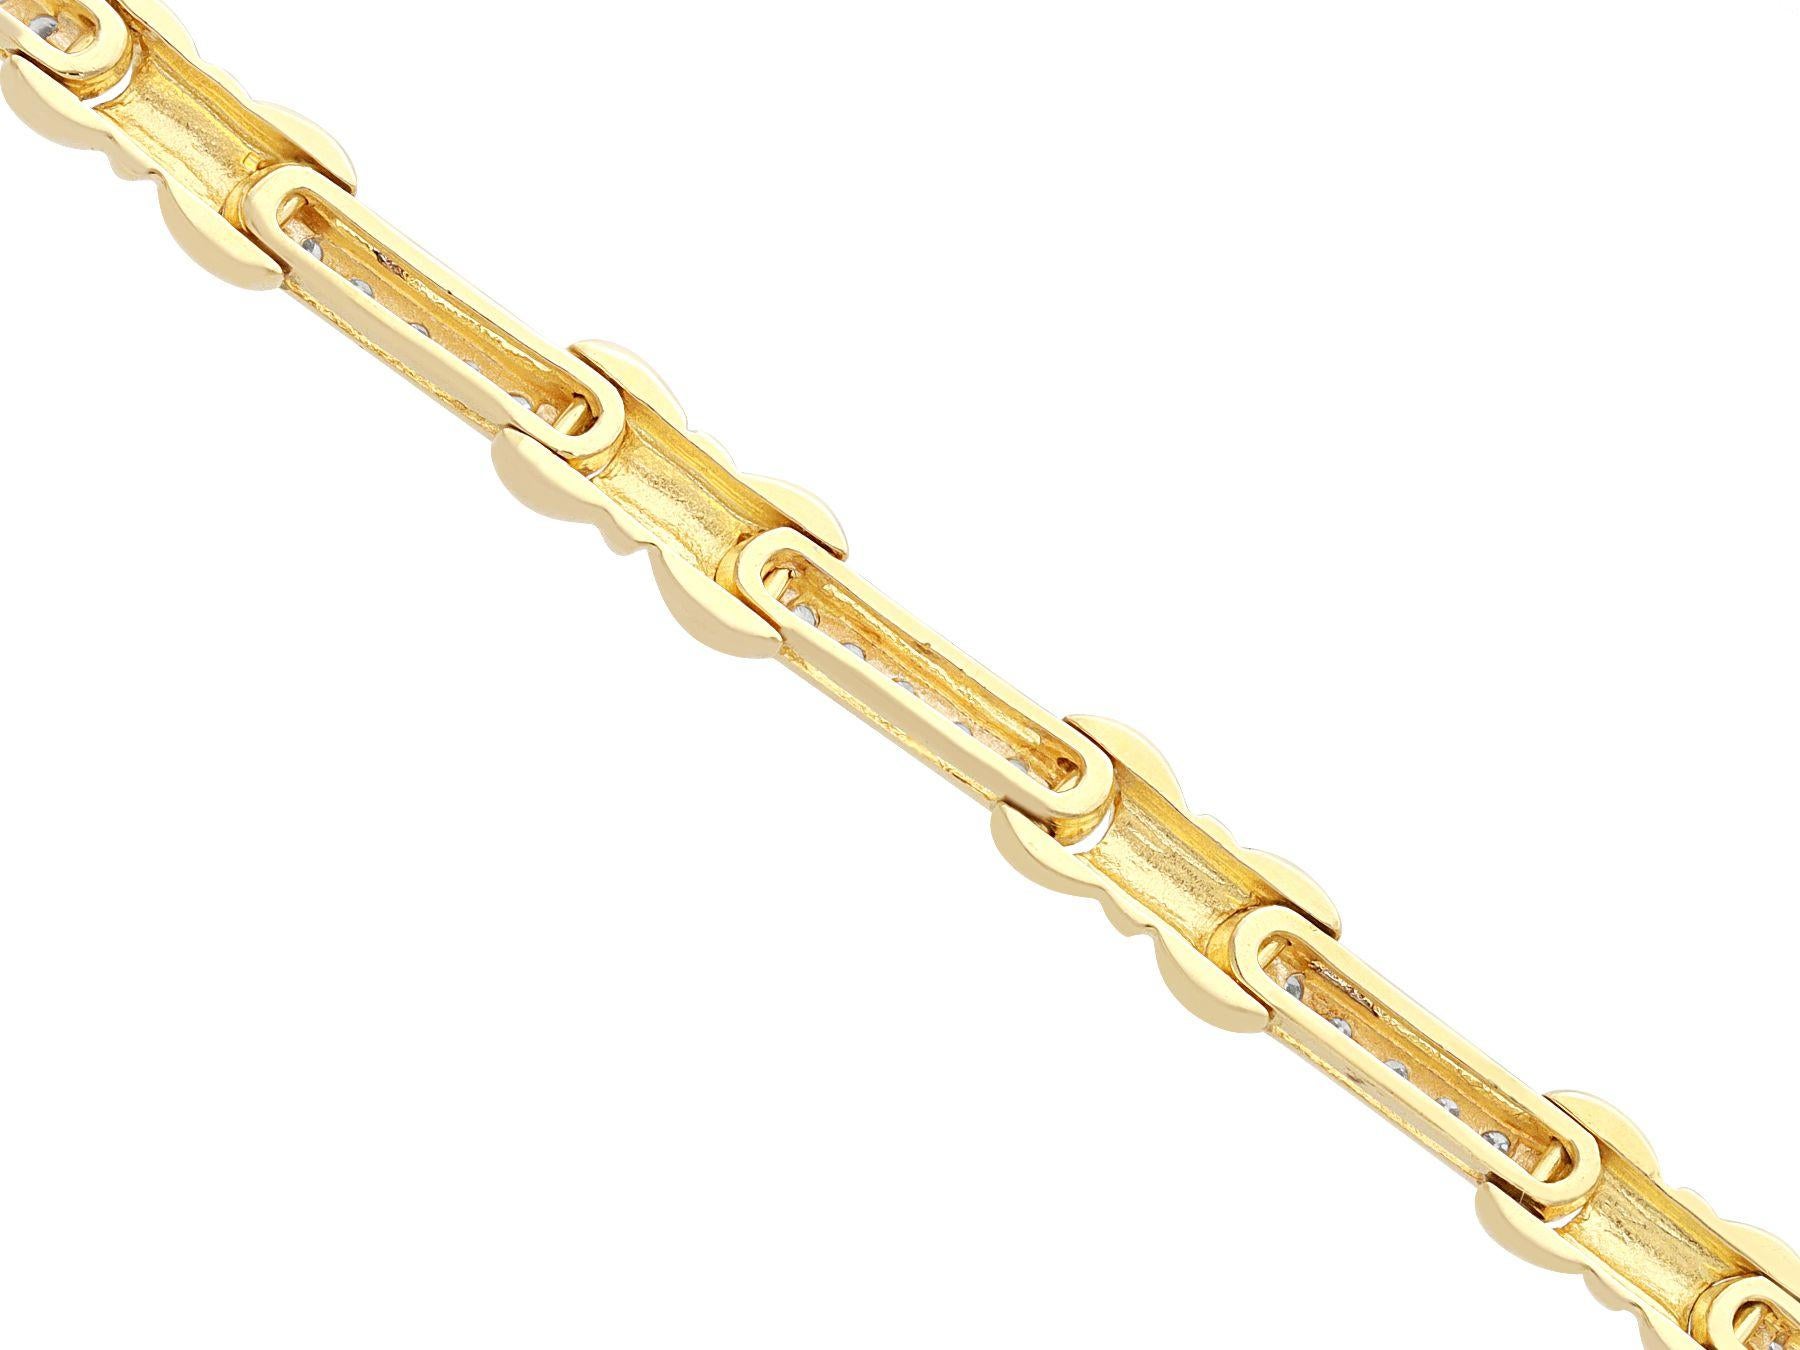 Vintage Diamond and 18k Yellow Gold Bracelet In Excellent Condition For Sale In Jesmond, Newcastle Upon Tyne